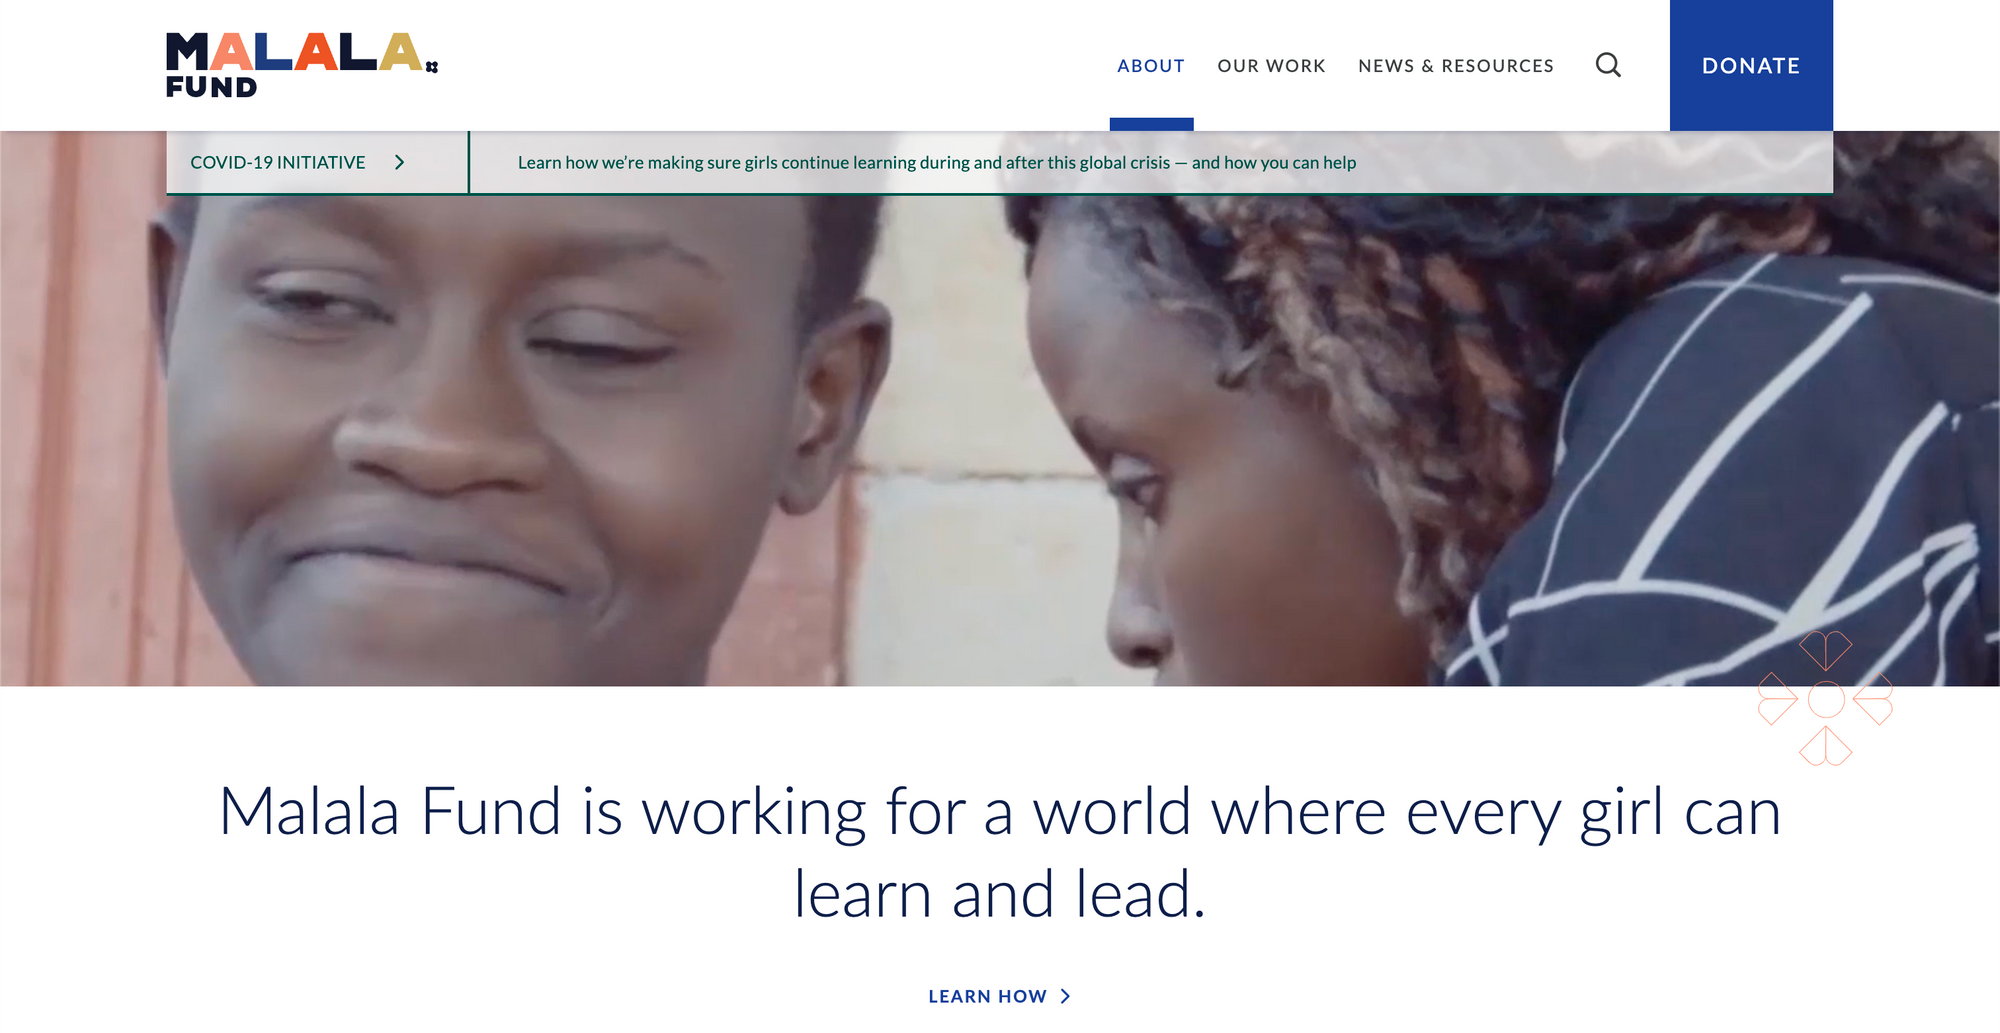 A screenshot of the Malala Fund website that says Malala Fund is working for a world where every girl can learn and lead.